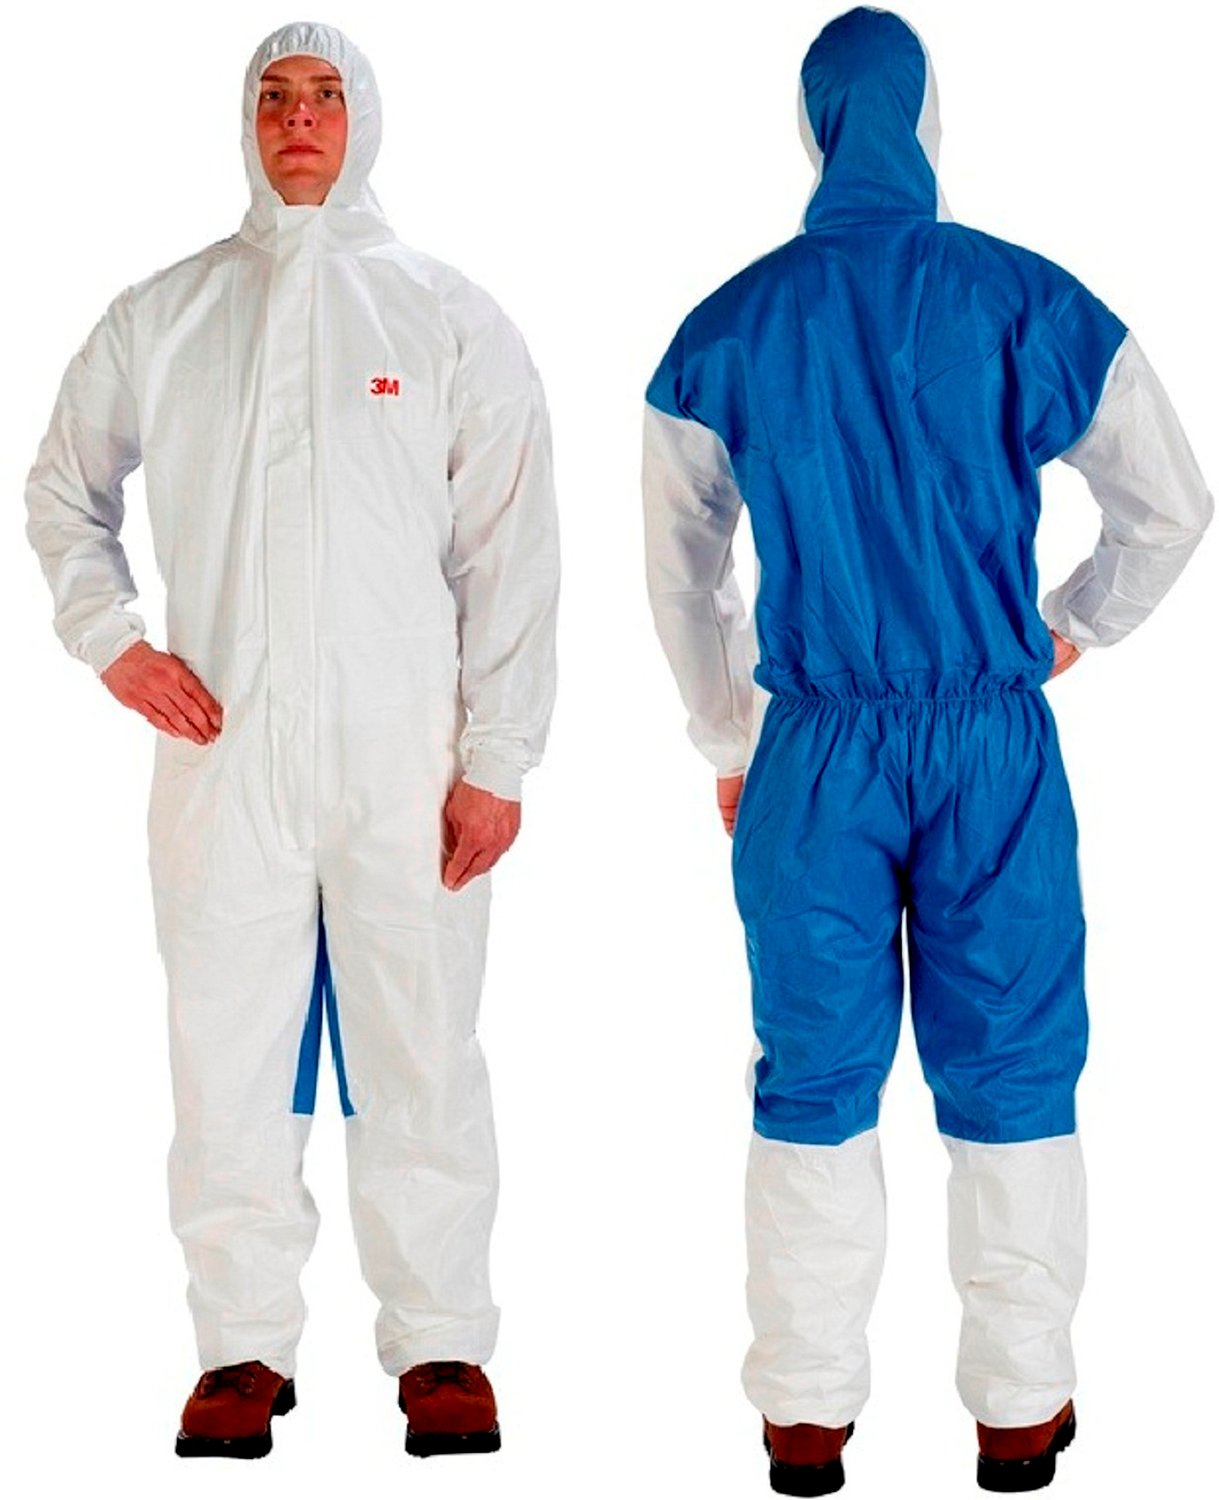 7100216888 - 3M Protective Coverall 4535, White/Blue Type 5/6, 4XL, 20 ea/Case